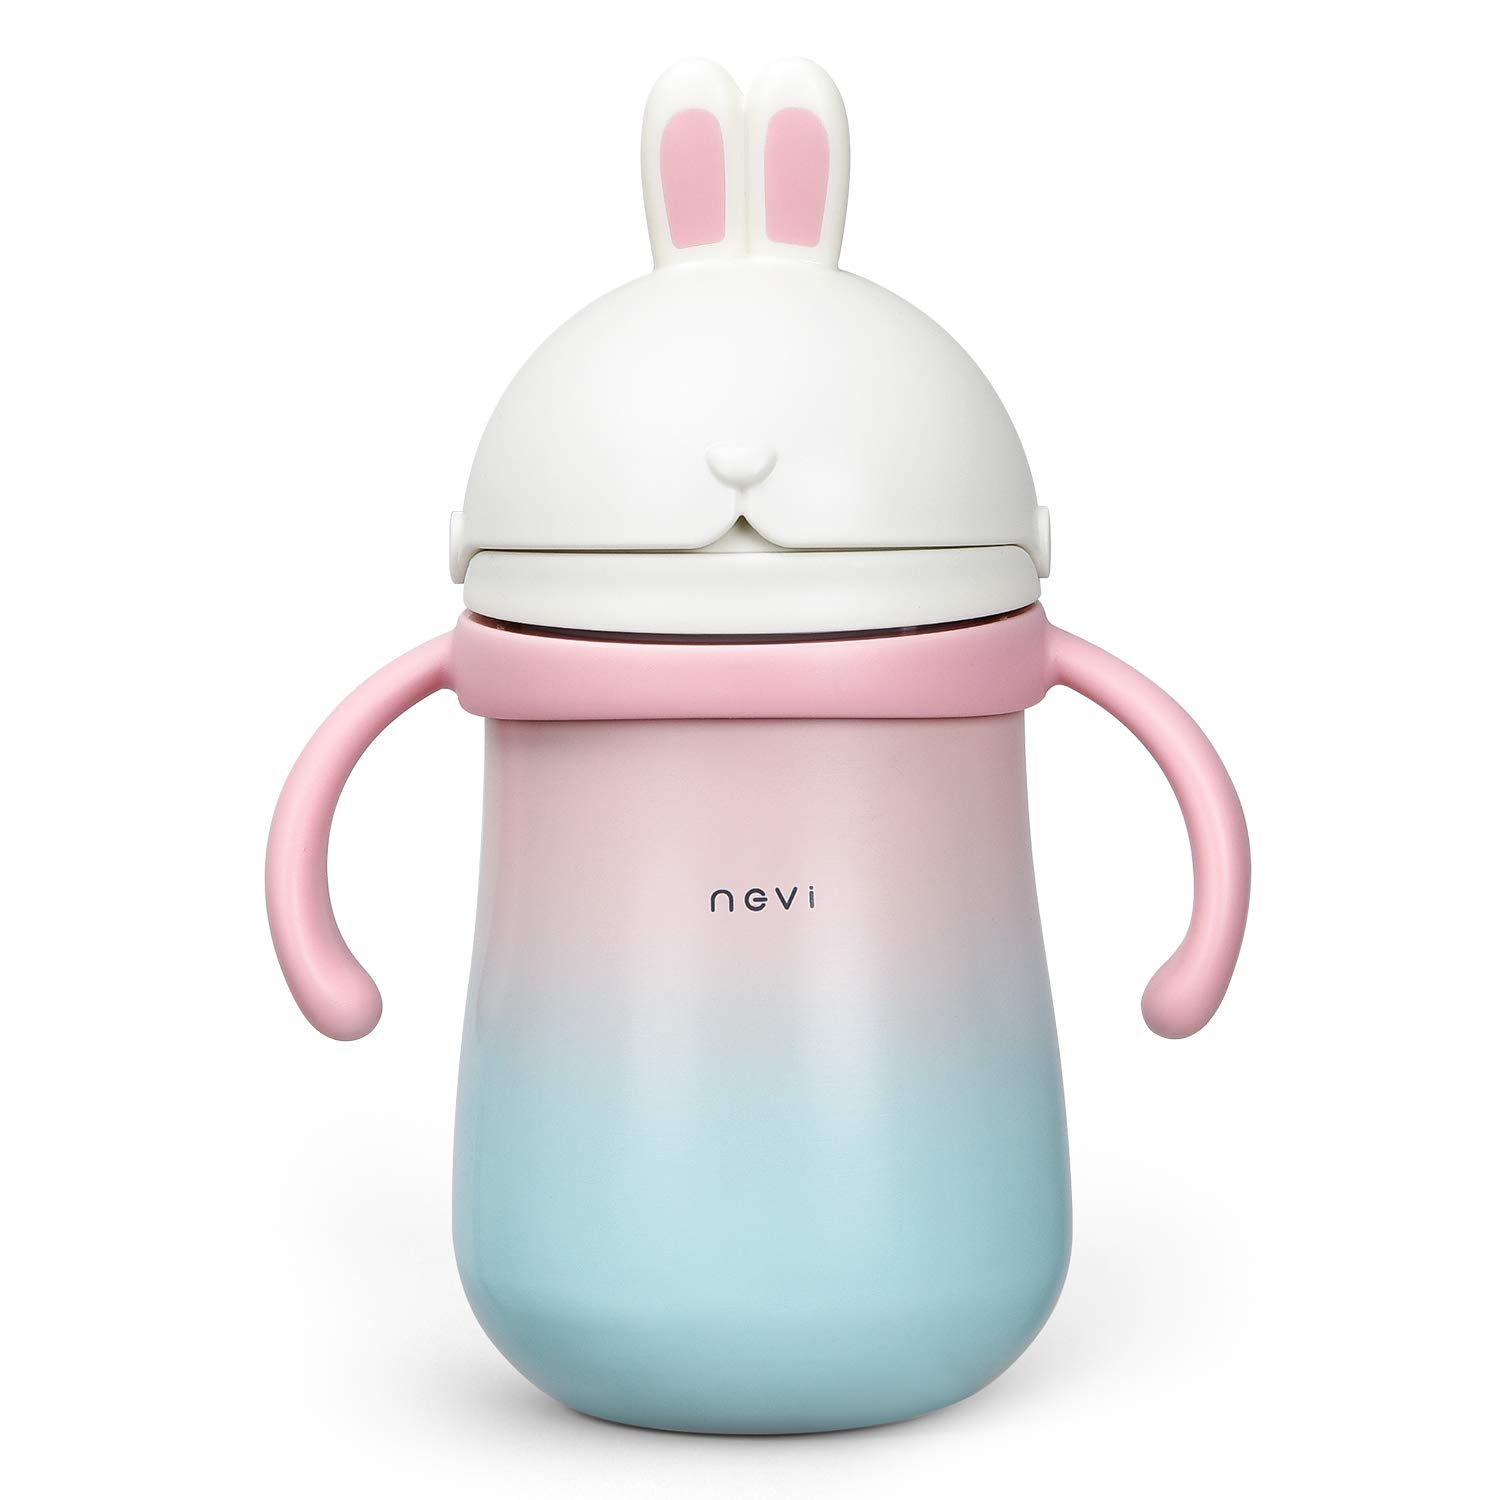 Bunny Treats Personalized Toddler Sippy Cup - 10 oz Pink